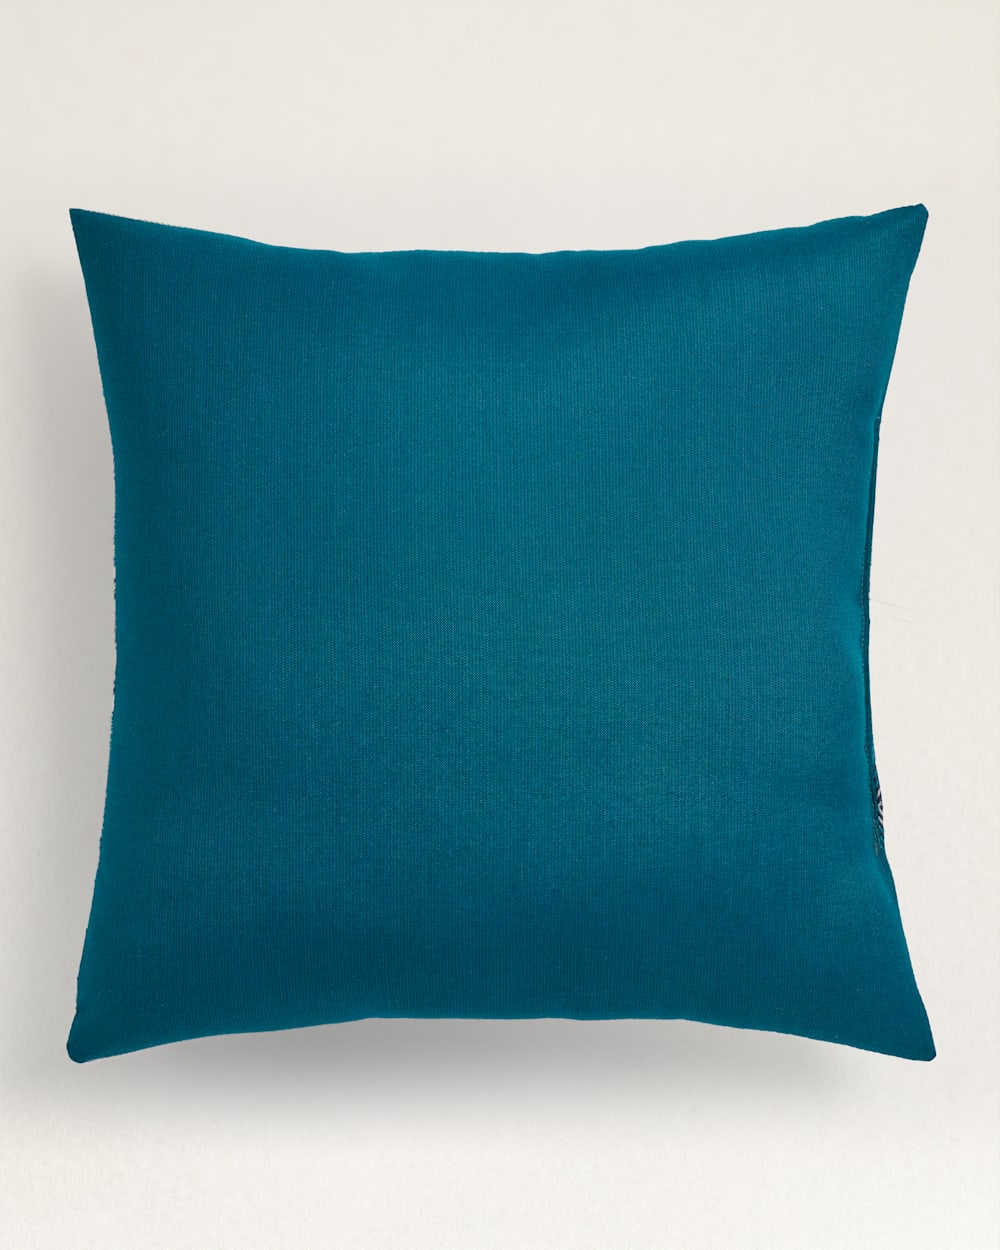 ALTERNATE VIEW OF SUNBRELLA X PENDLETON SQUARE OUTDOOR PILLOW IN MOJAVE/TURQUOISE image number 3